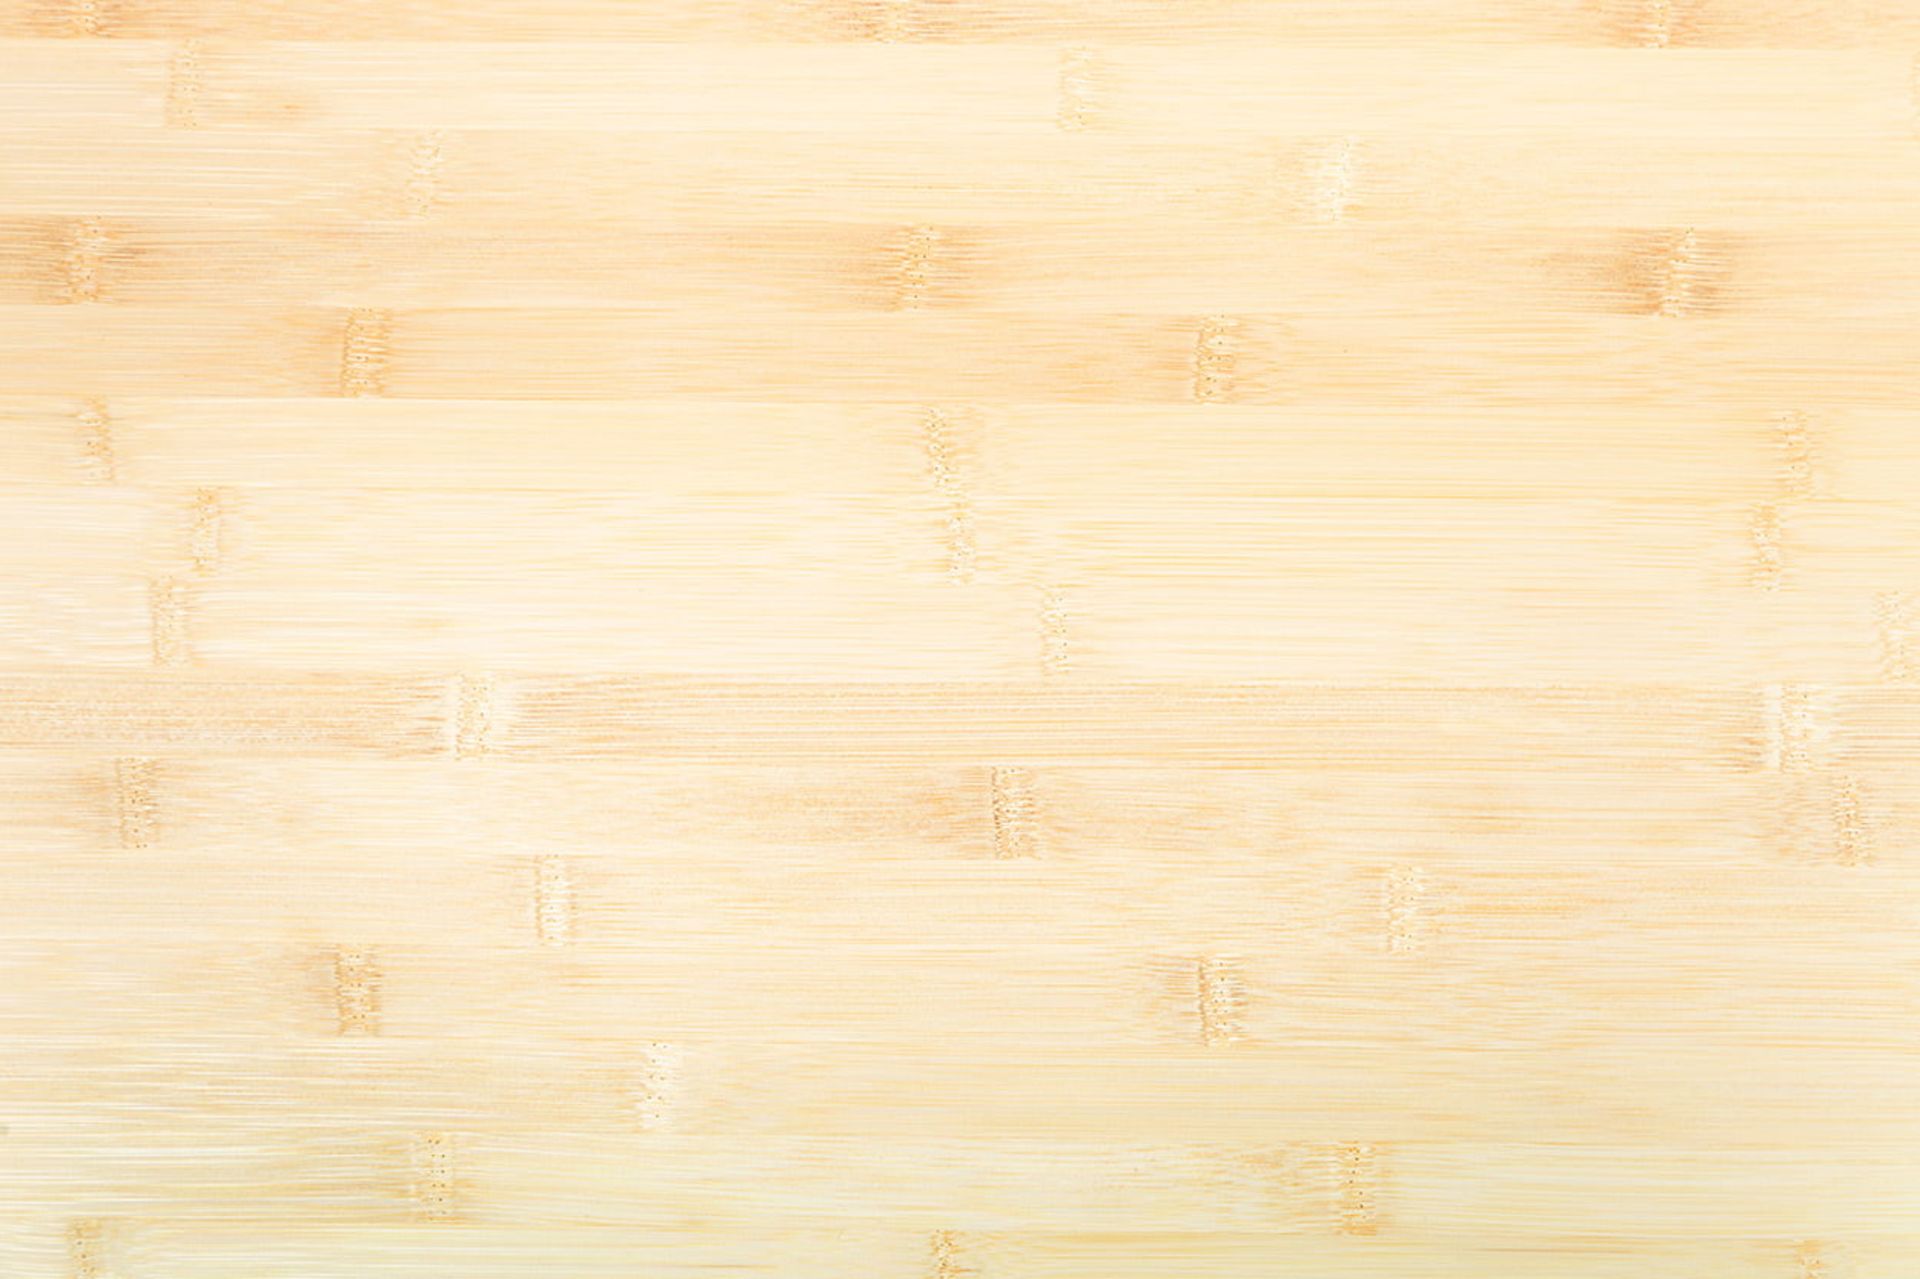 1 x Layered Solid Bamboo Wood Kitchen Worktop - Size: 3000 x 650 x 40mm - Ideal For Kitchens, - Image 2 of 6